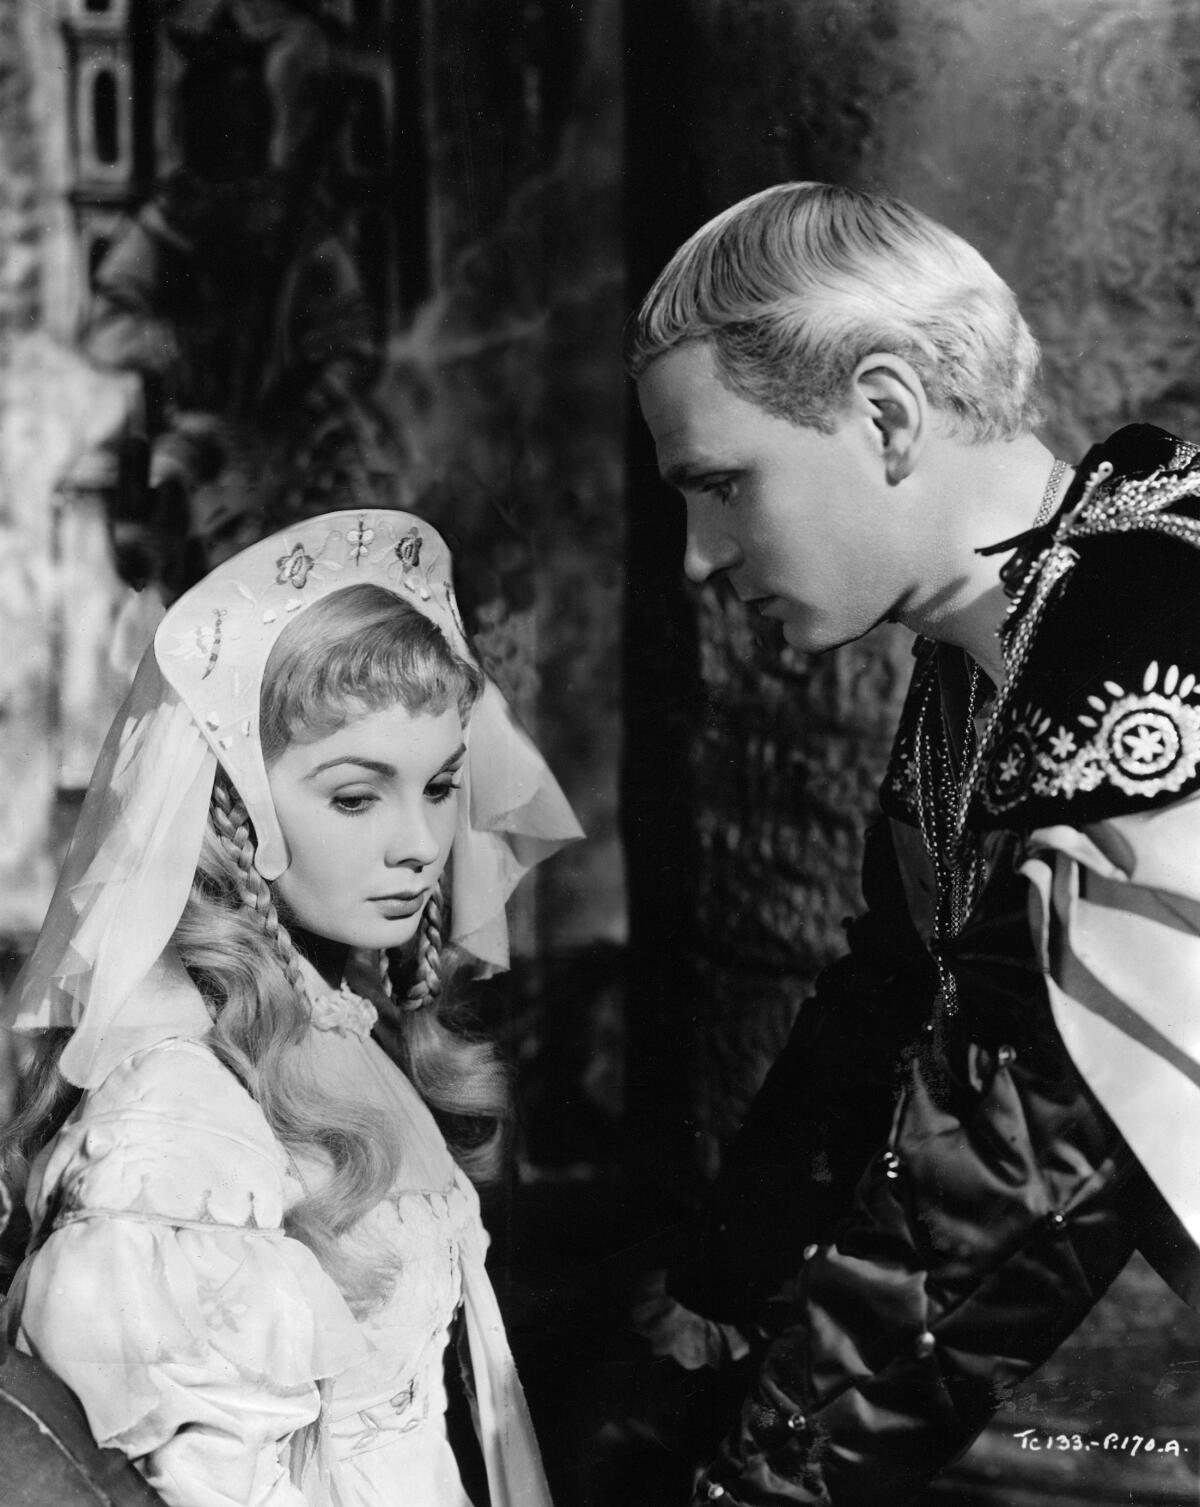 A woman looks down and away from a man, both in Shakespearean costume.